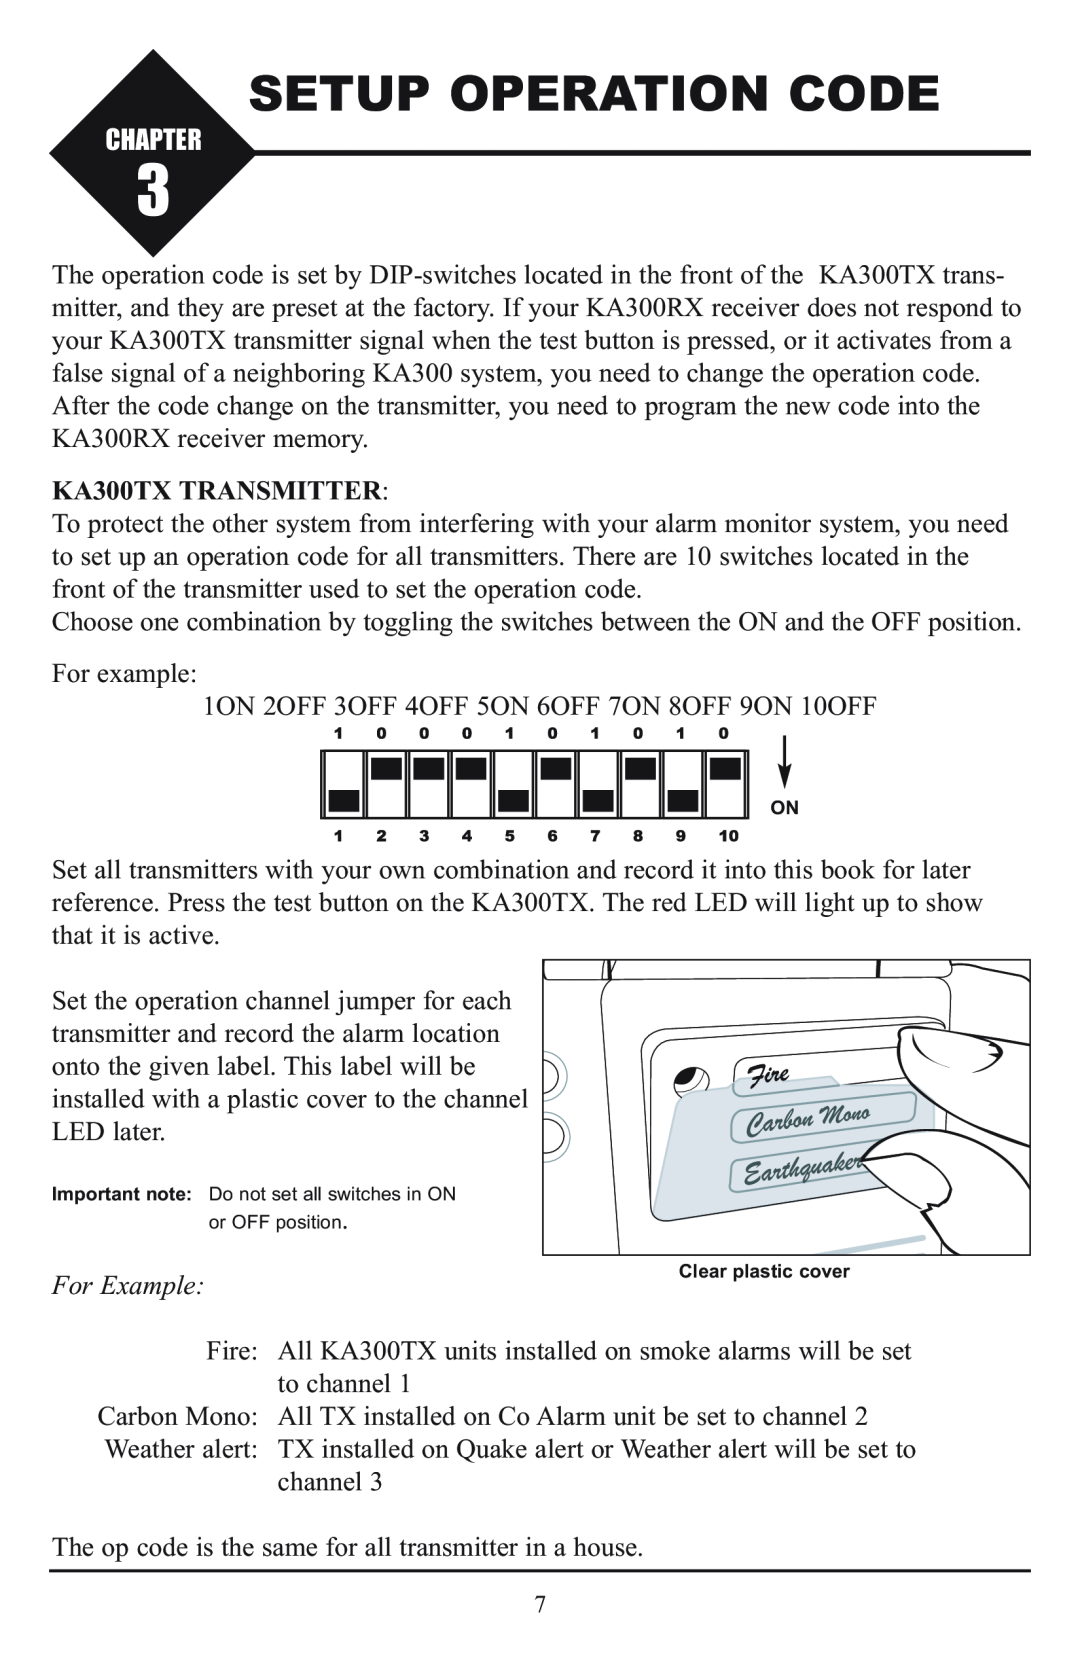 Krown Manufacturing KBS300RX instruction manual Setup Operation Code, For Example, Chapter, KA300TX TRANSMITTER 